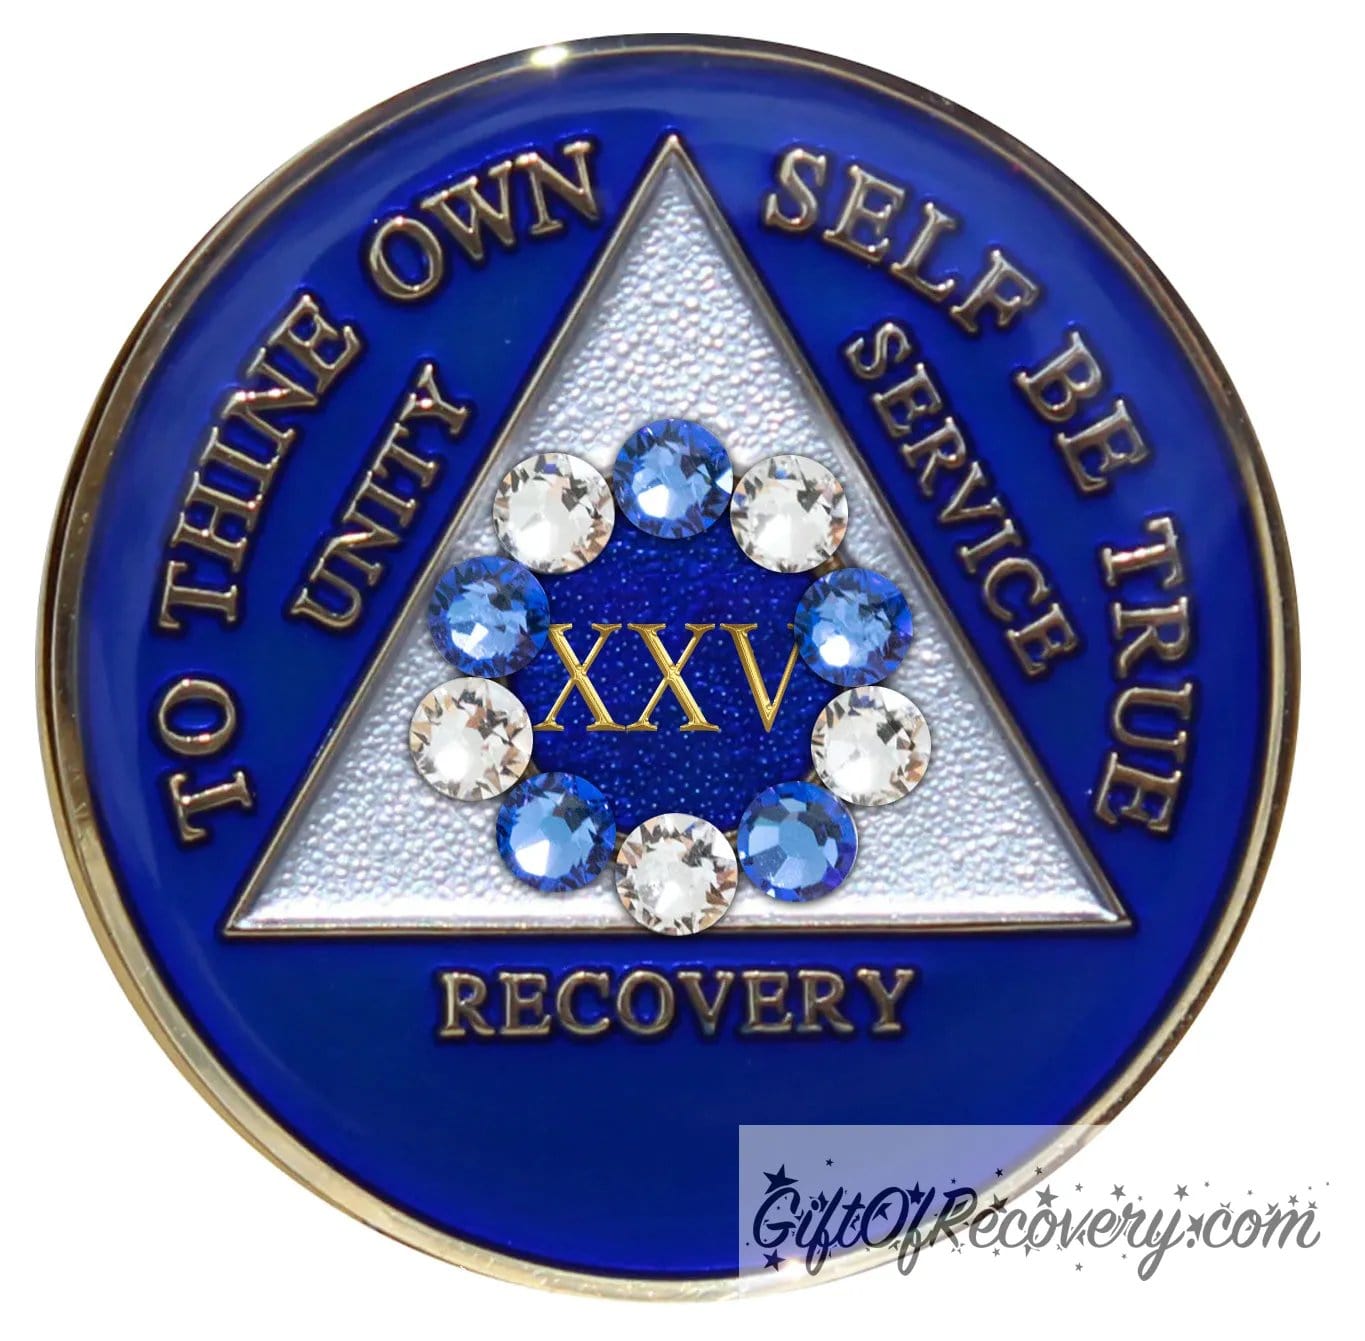 25 Year Big Book Blue AA medallion with 5 blue genuine crystals and 5 clear genuine crystal, making a circle around the 25 year, the recovery medallion has raised lettering to thine own self be true, and the outer rim of the medallion in 14k gold, inside the triangle is white and blue, emphasizing action and reflection.